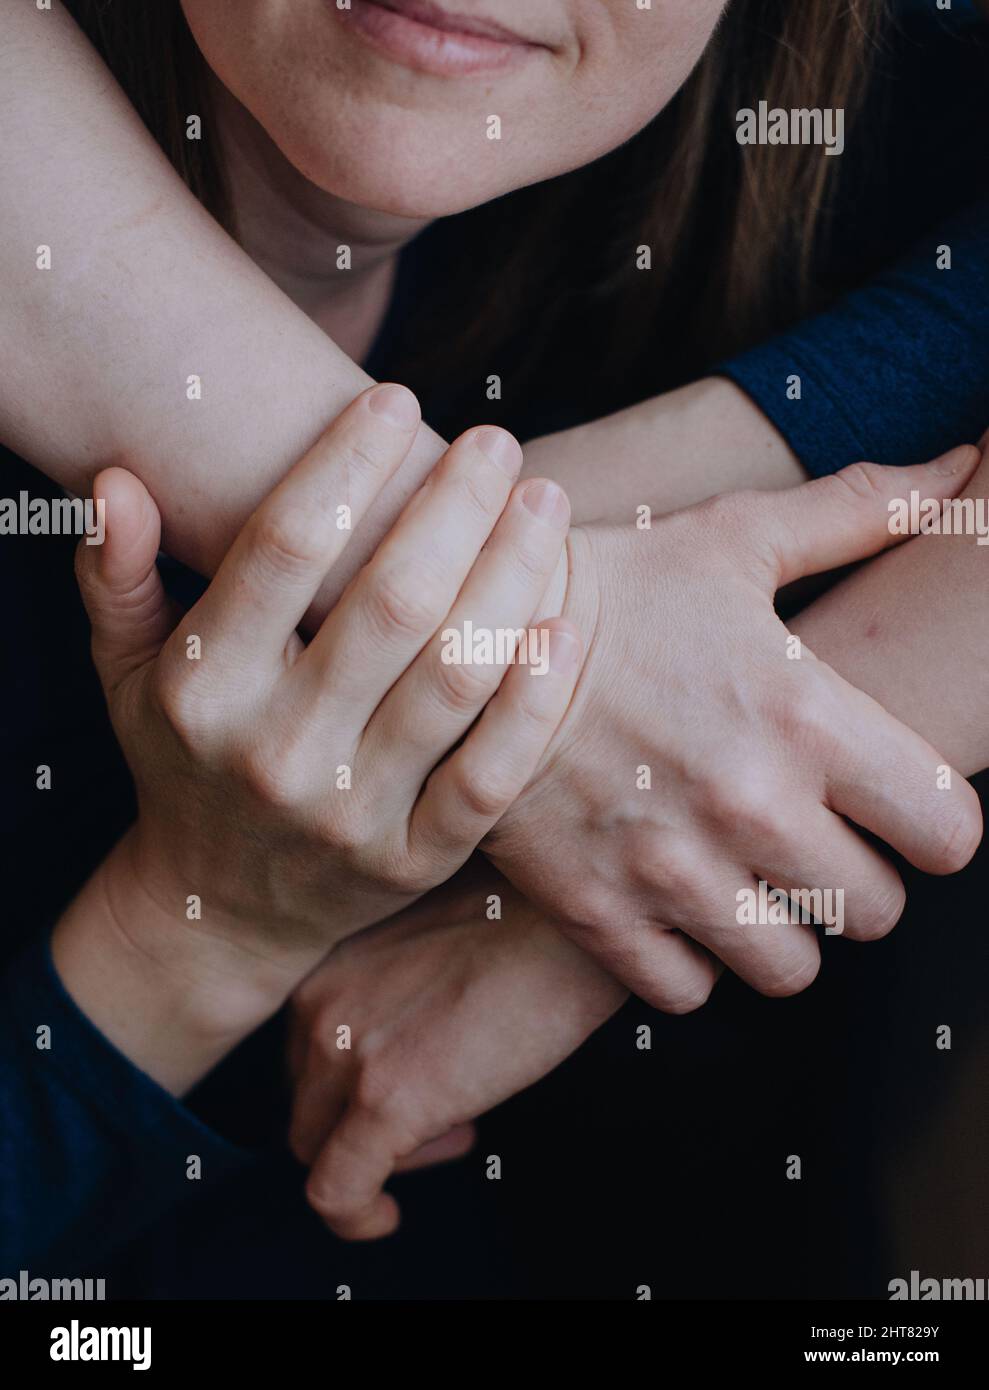 hugging hands of two woman Stock Photo